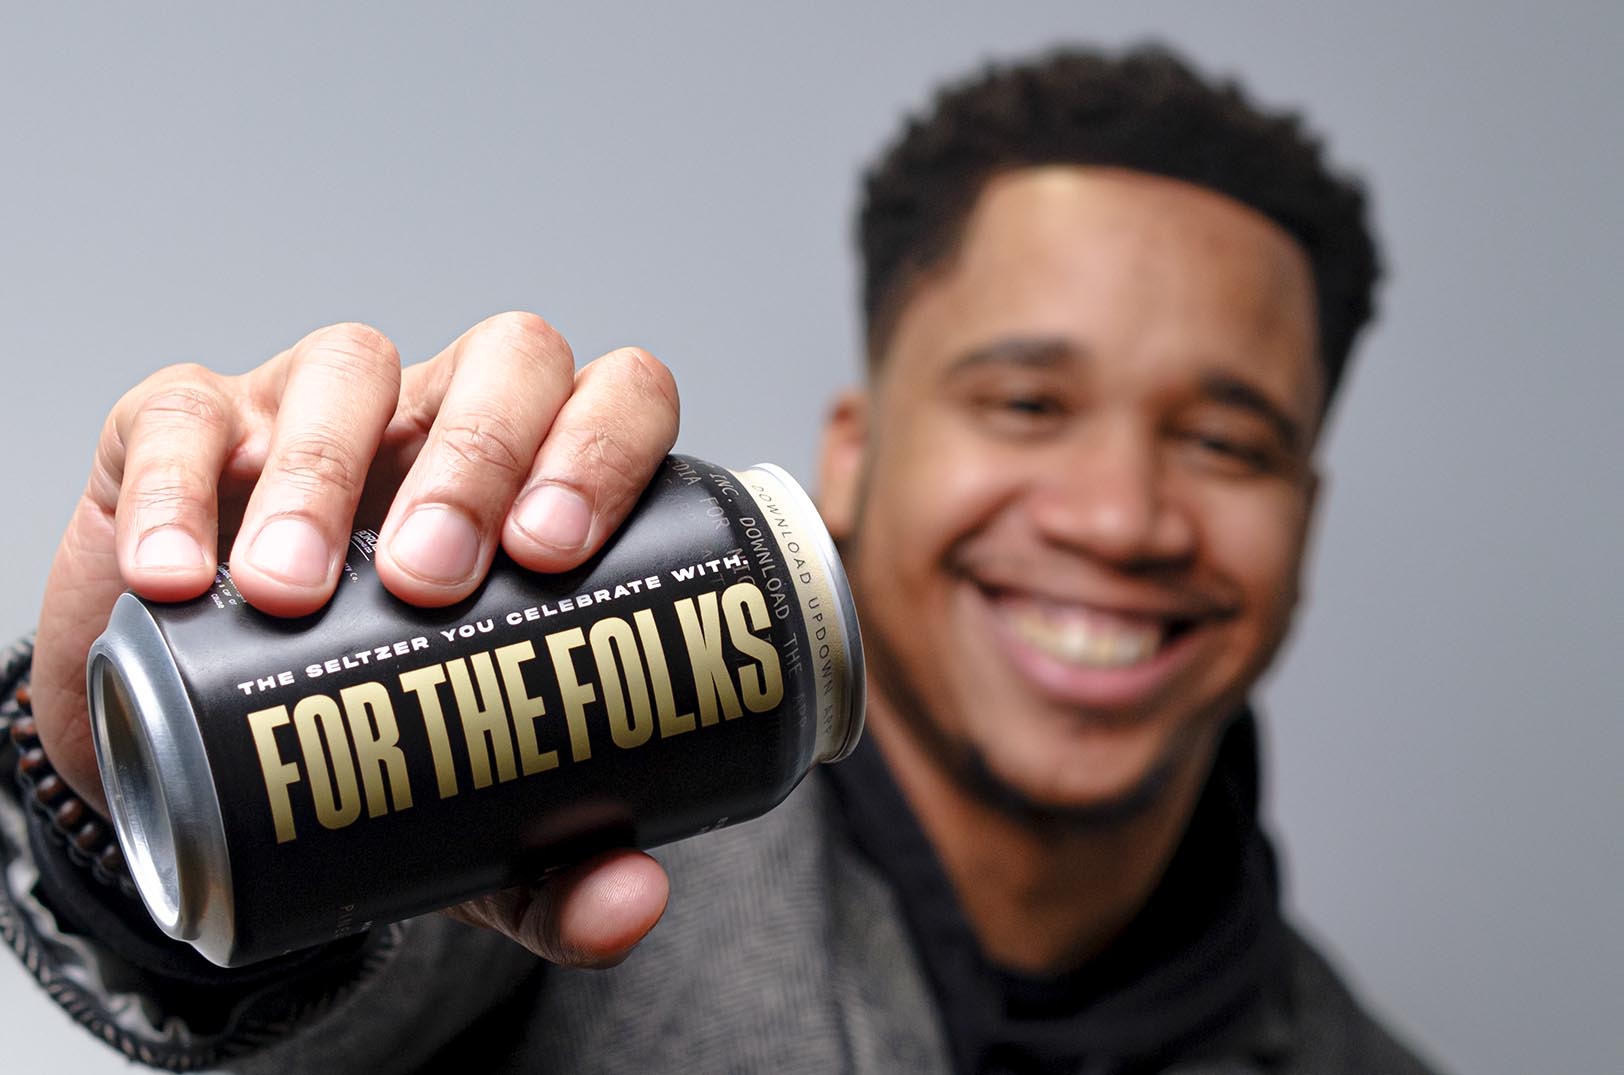 Kin crafts flavor into hard seltzer market, targeting overlooked Black consumers looking for authentic social experiences